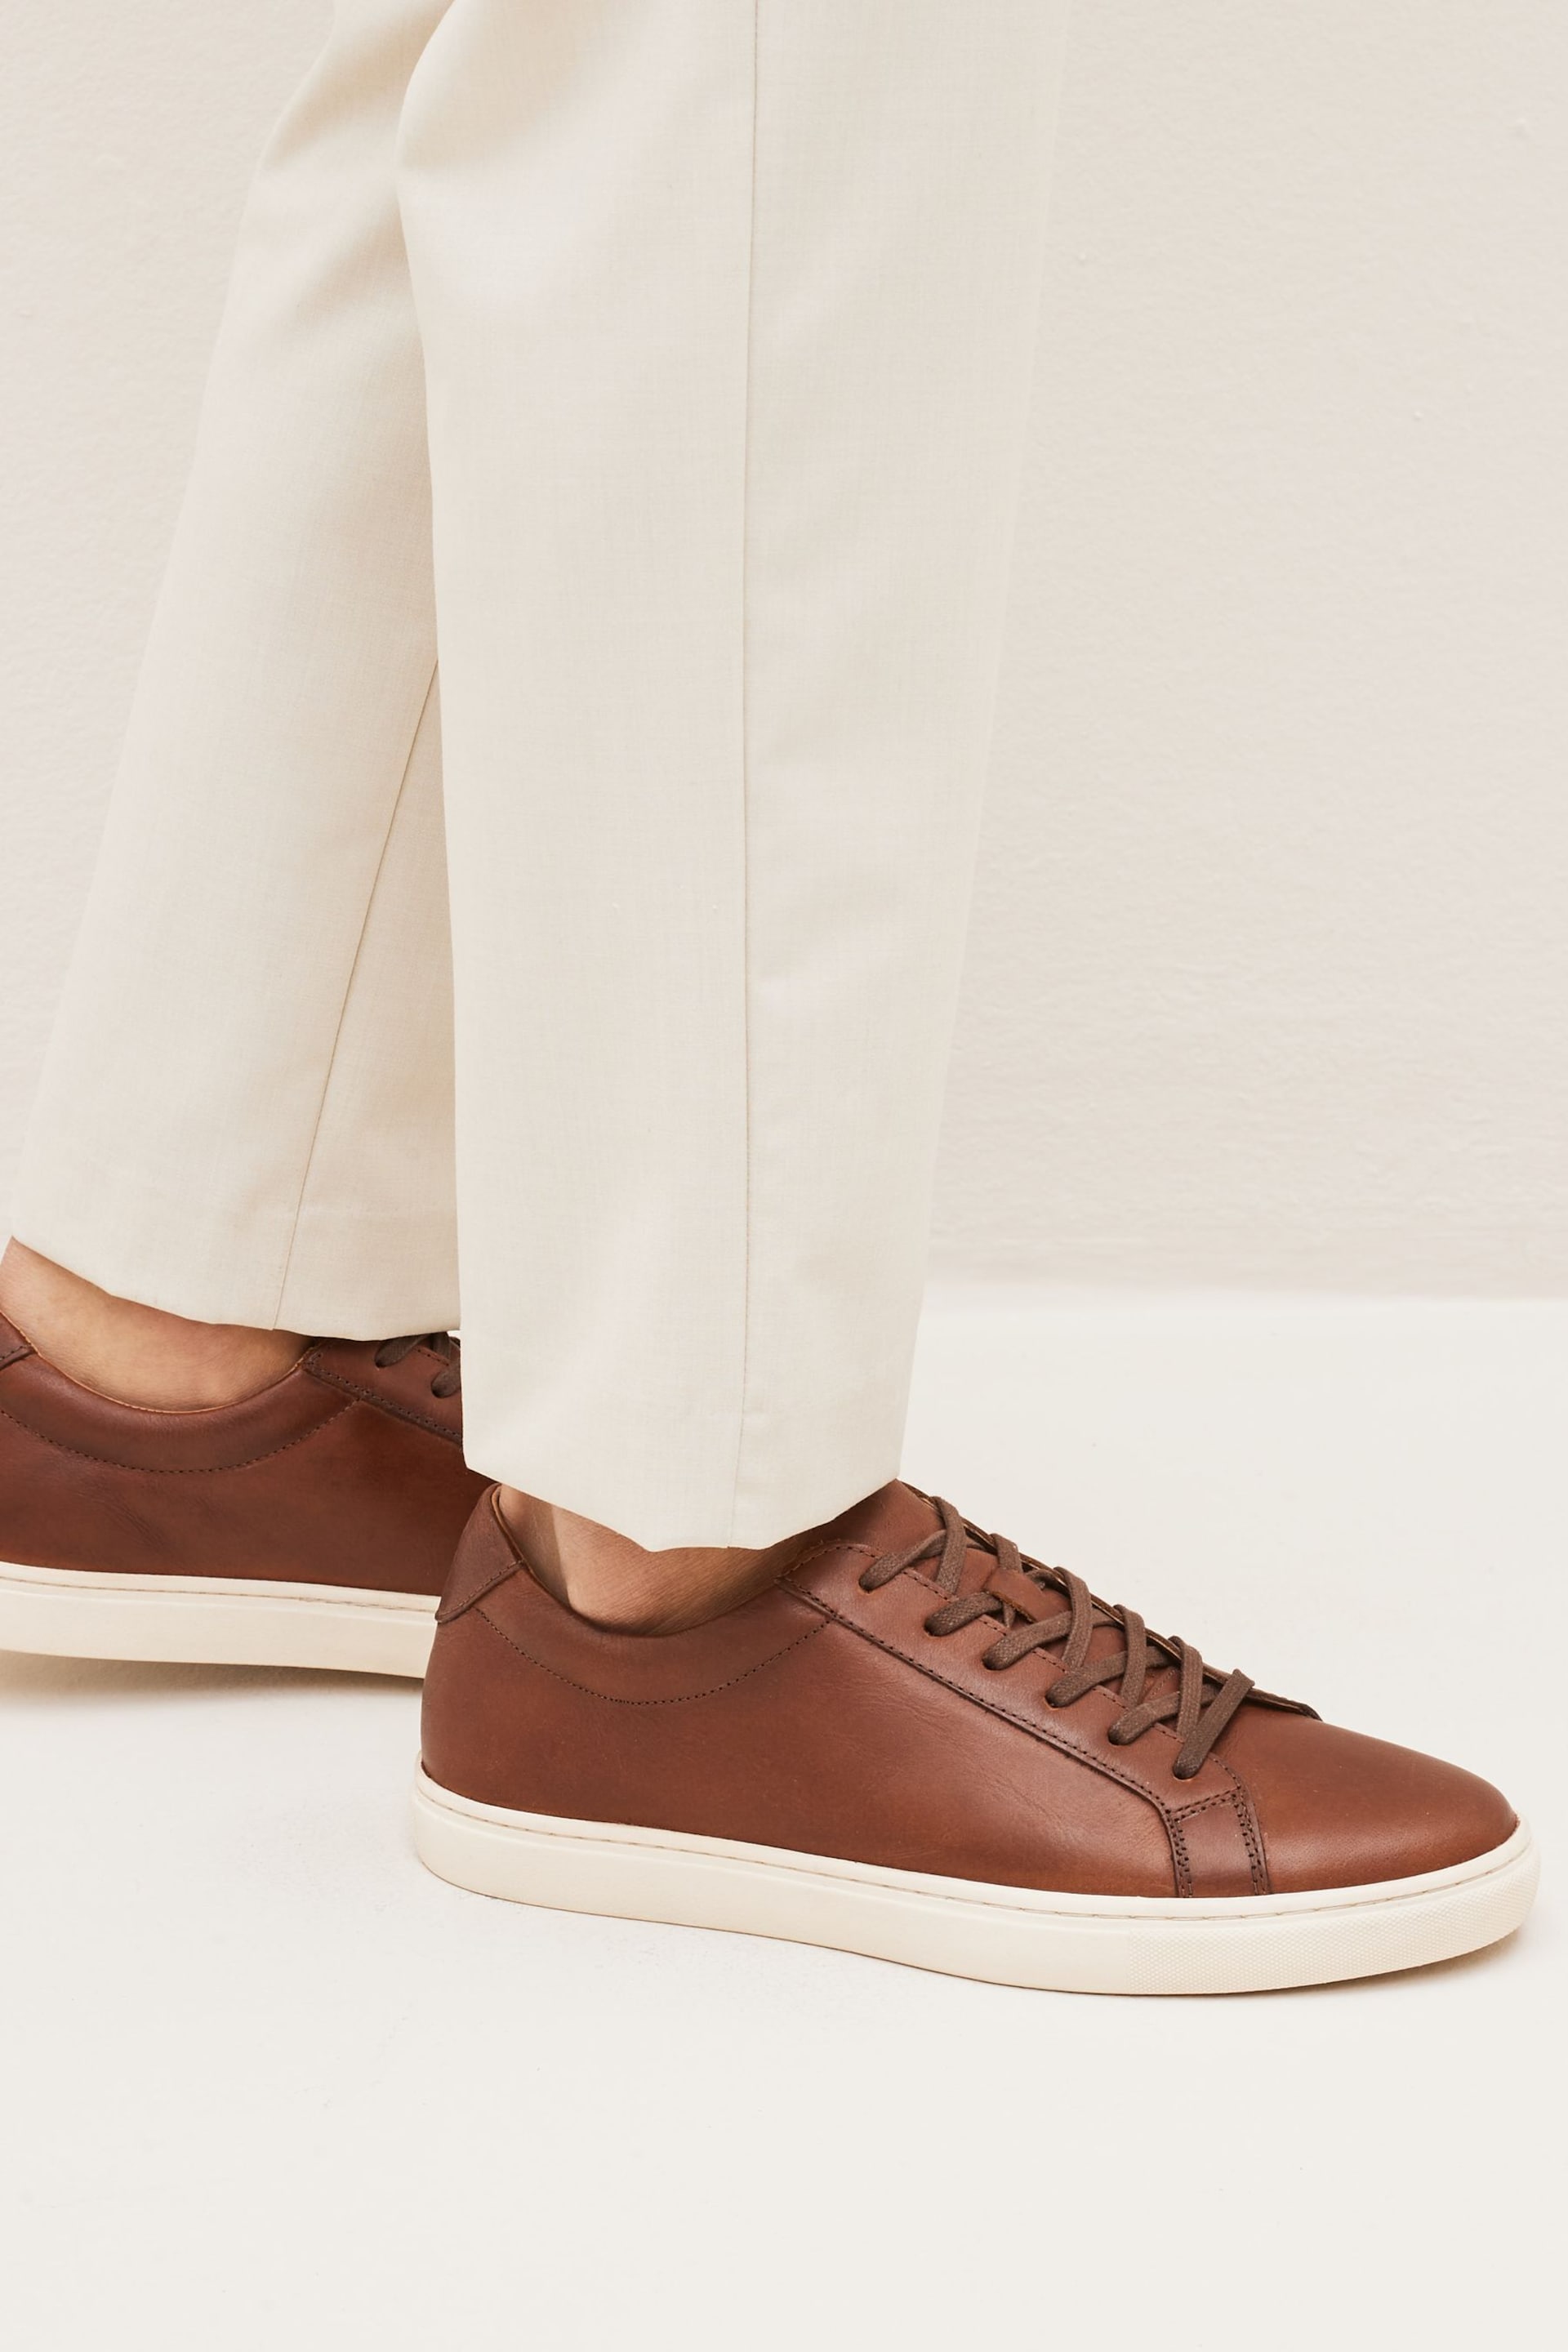 Tan Brown Leather Trainers - Image 1 of 6